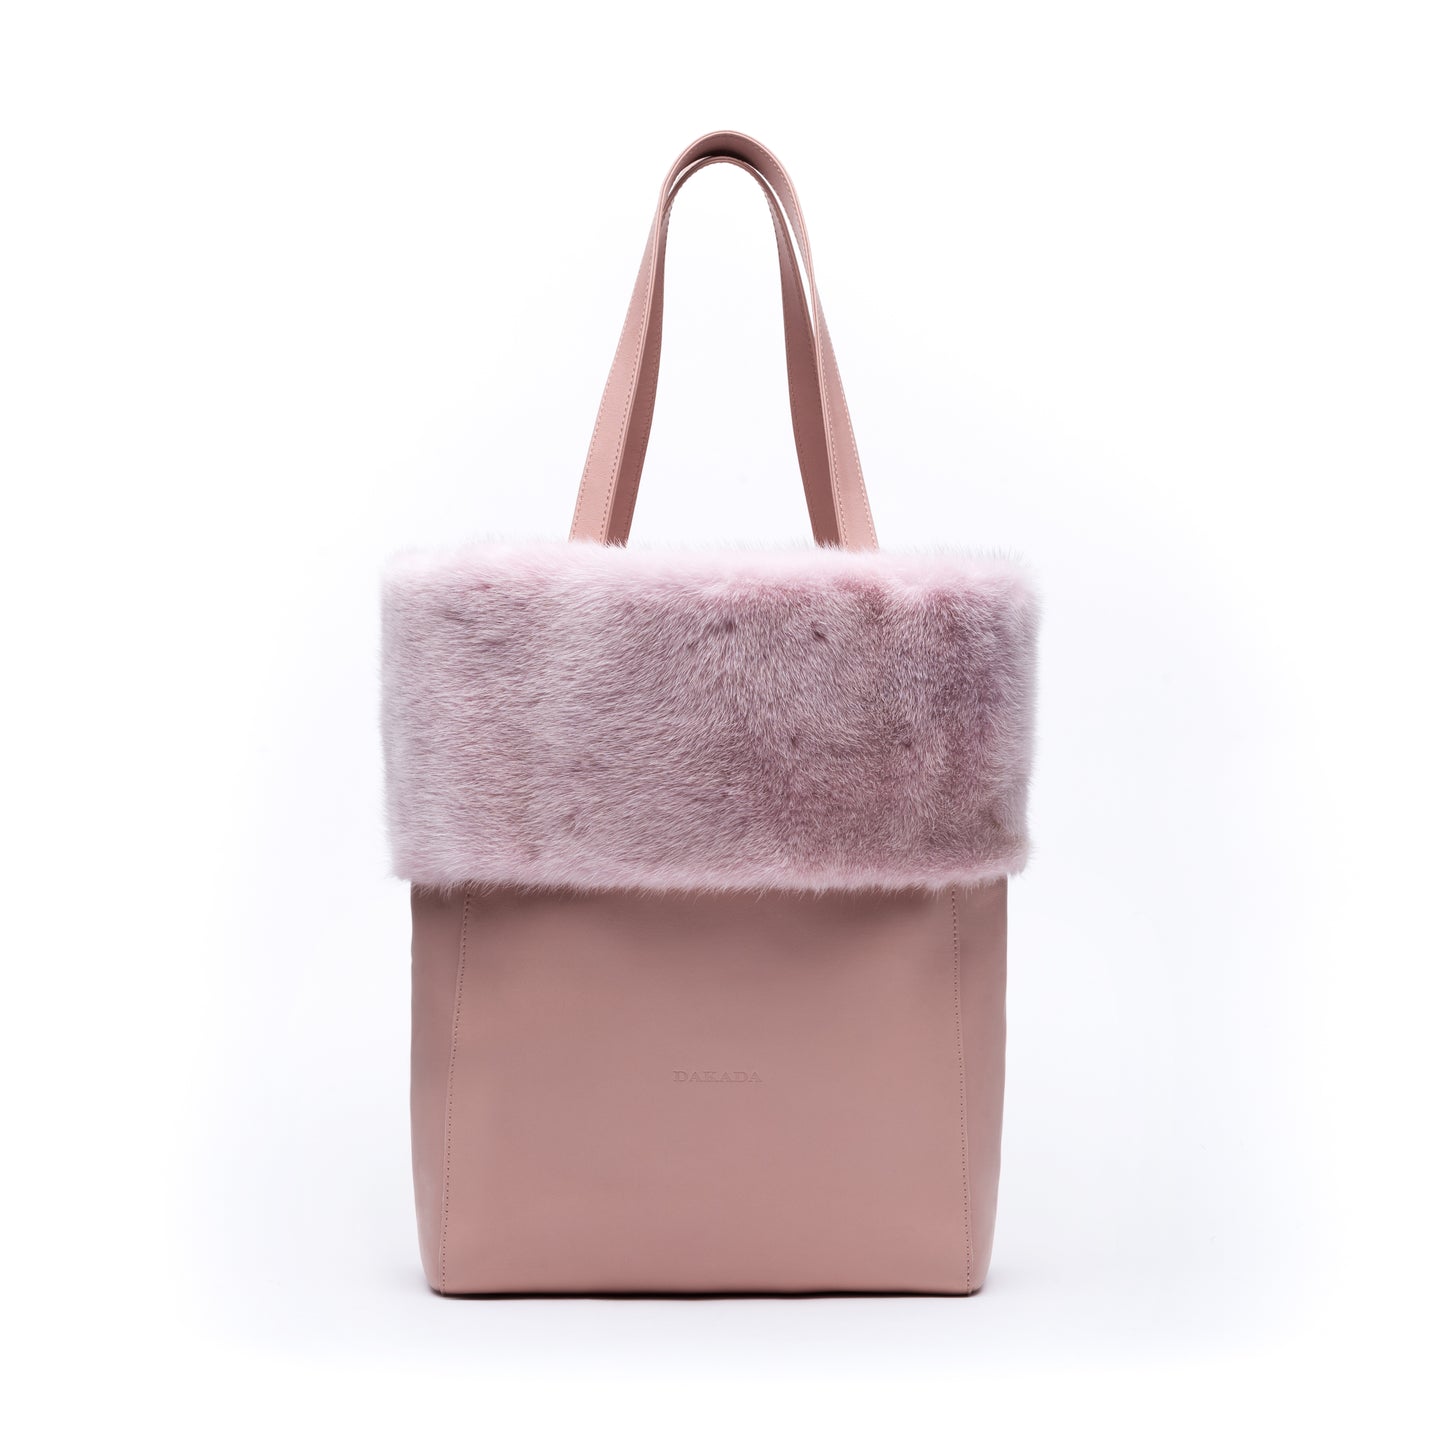 Kaley- Pink Leather Tote with Pink Mink